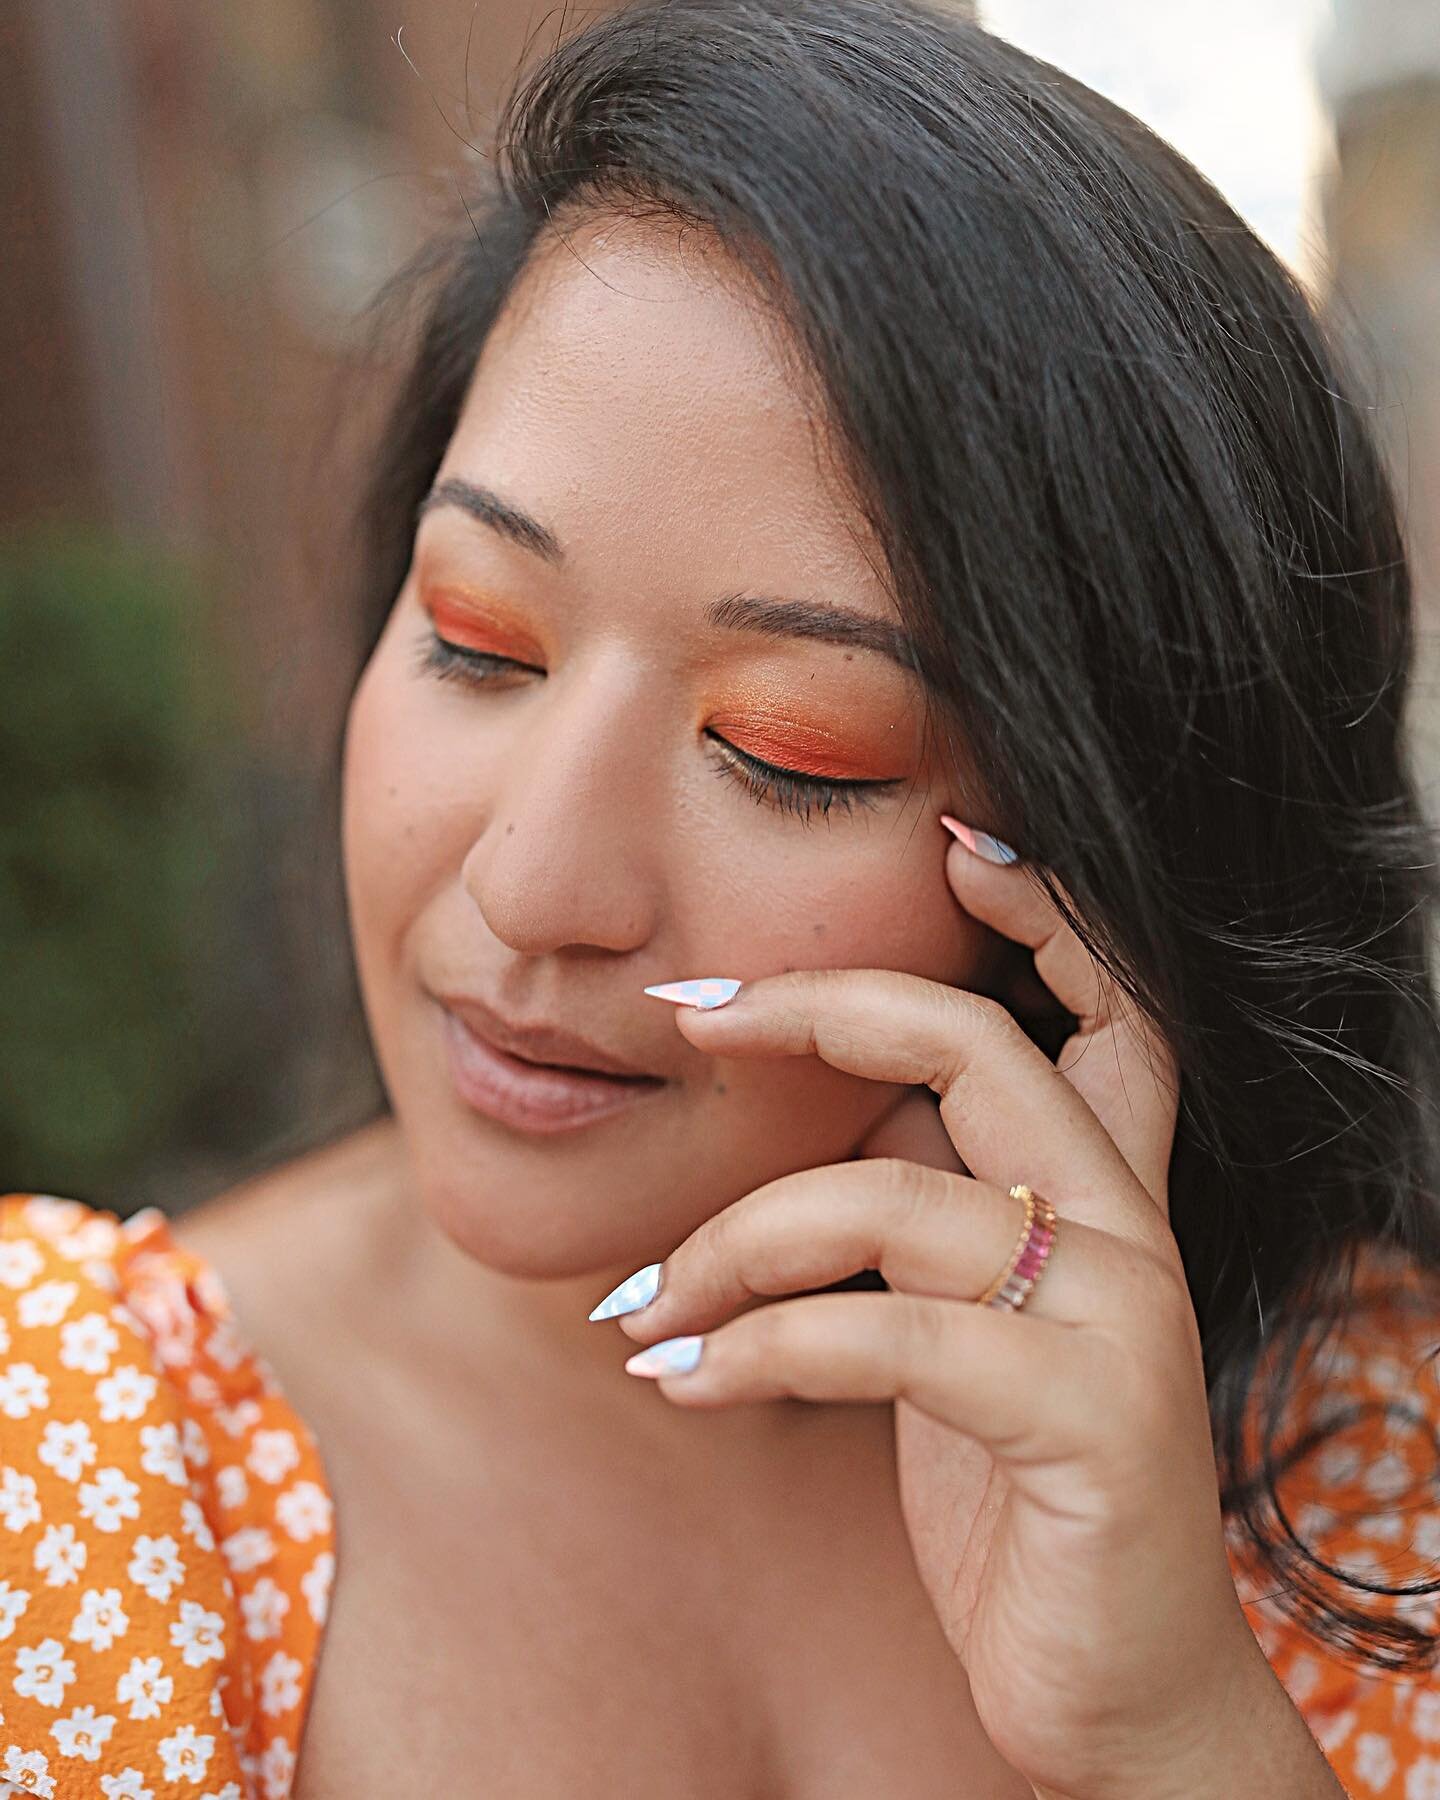 Summer sunset inspired eye makeup 🌅Would you add a little yellow or orange to your makeup look? ⁠
⁠
Swipe right to see the reaction I get every time my @ipsy bag arrives and what was in it this month. ⁠
⁠
#KritySBeauty⁠
#ipsy #ipsygiftedme #IPSYdoyo